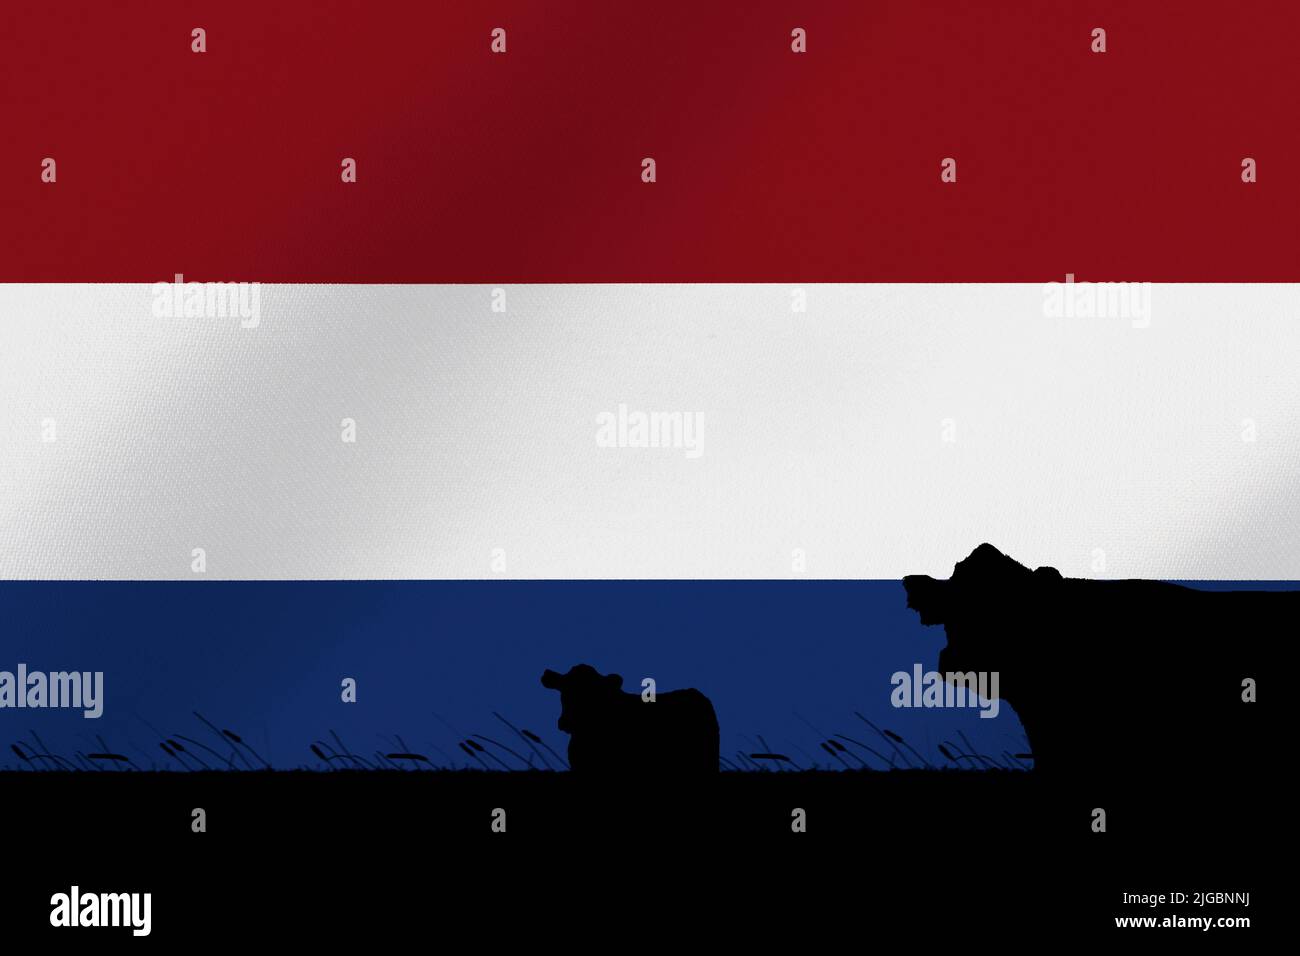 Consumption and production of cattle in countries with the flag of  Netherlands Stock Photo